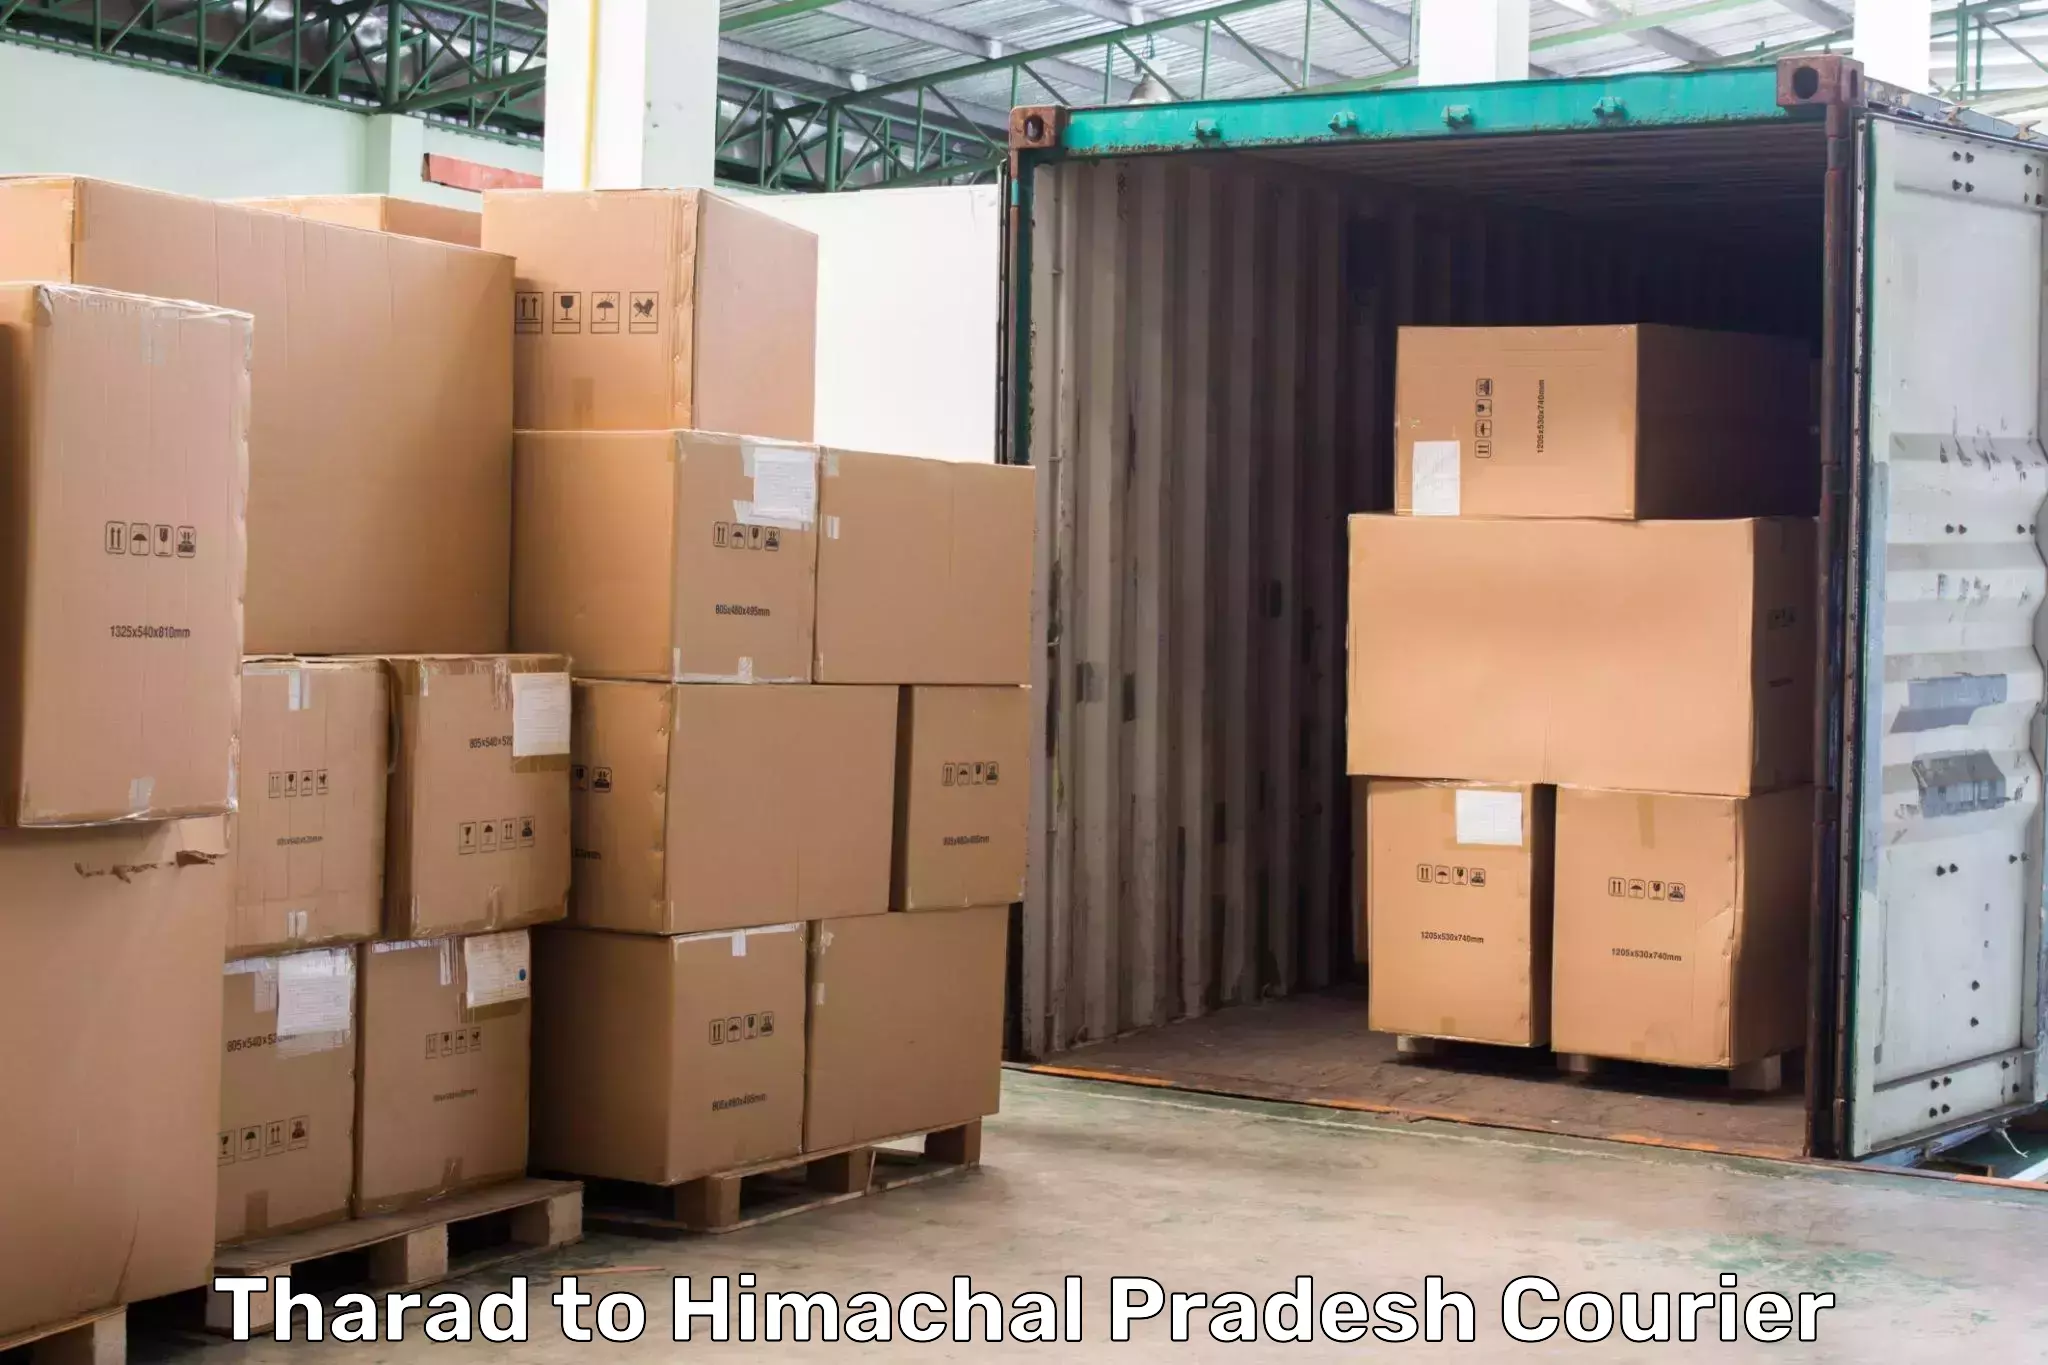 Express delivery network Tharad to Dharamshala